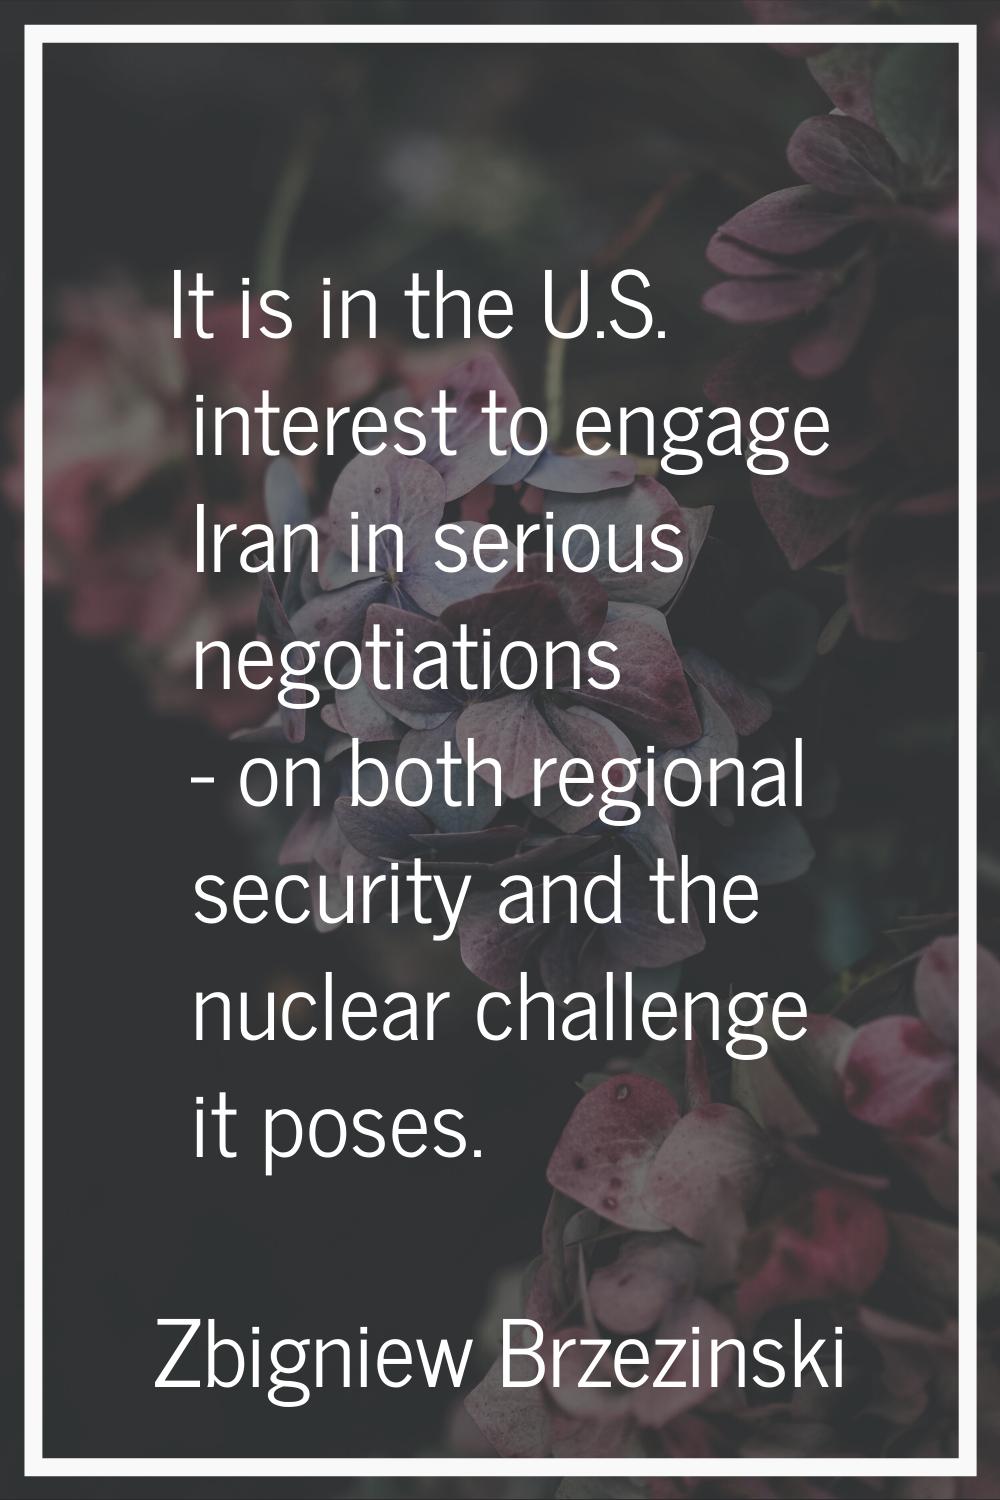 It is in the U.S. interest to engage Iran in serious negotiations - on both regional security and t